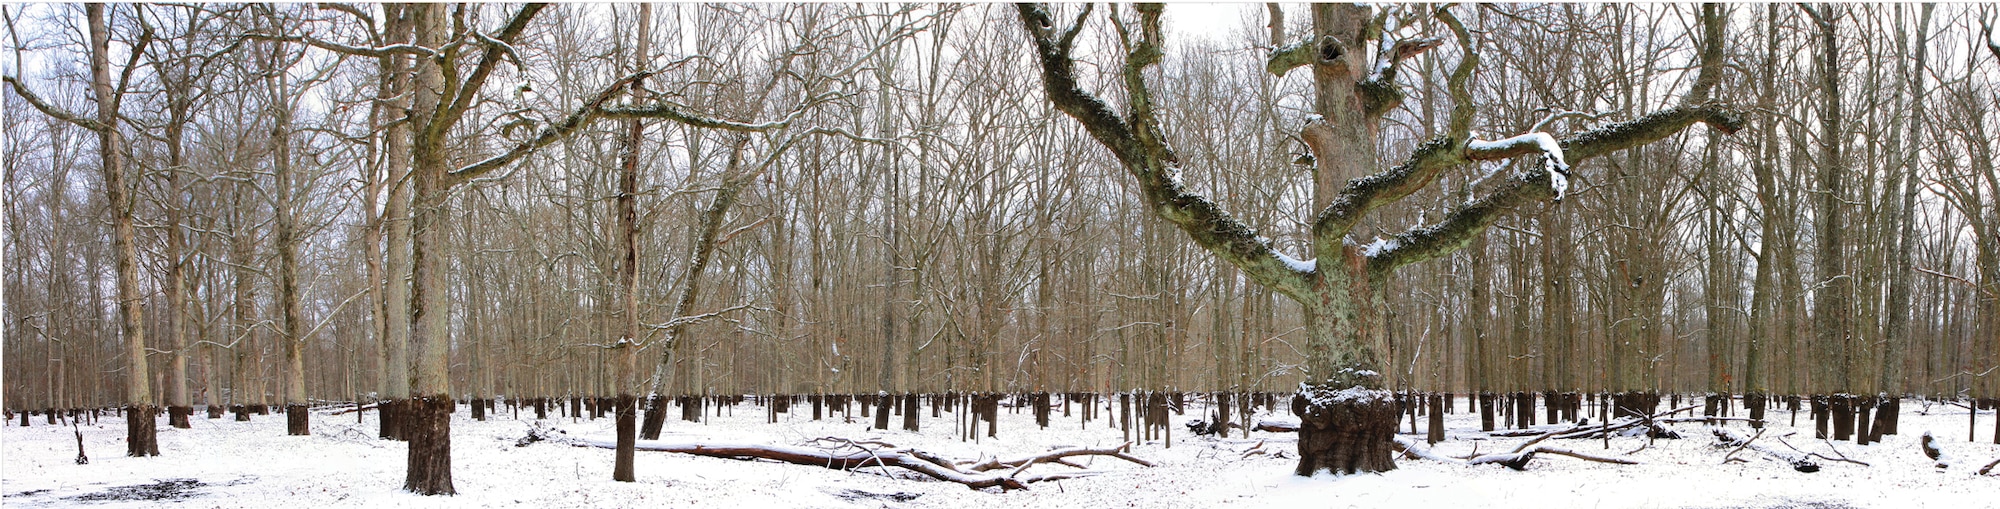 This view of Sinking Pond shows the stark contrast between the dark water lines on the tree trunks and the white snow. Sinking Pond, a special karst depression, is a 394-acre National Natural Landmark site on Arnold AFB. A unique feature of the site is that it can drain almost overnight as a function of a poorly understood change in groundwater hydrology. Maximum winter water depth varies from a few inches to 15 feet in various parts of the site. The pond is normally filled with water this time of year (November through July). However, due to the extended drought conditions in the area, the pond has been dry for some time. (Photo by Mike Hodges)